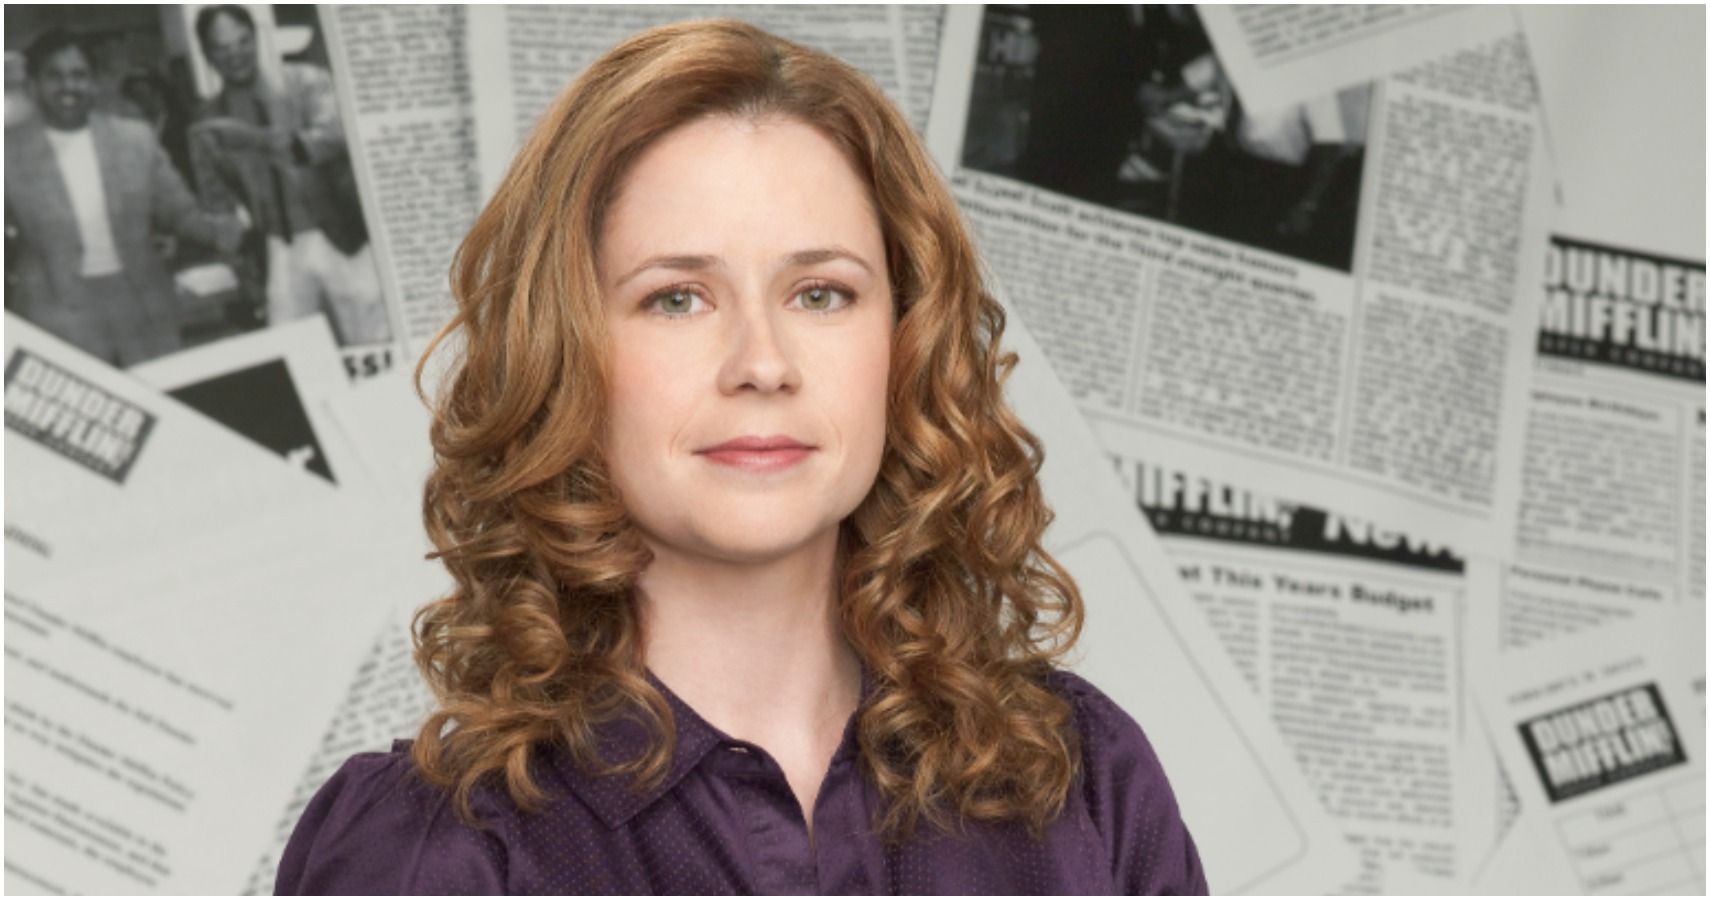 Profile shot of Jenna Fischer as Pam Beesly in The Office